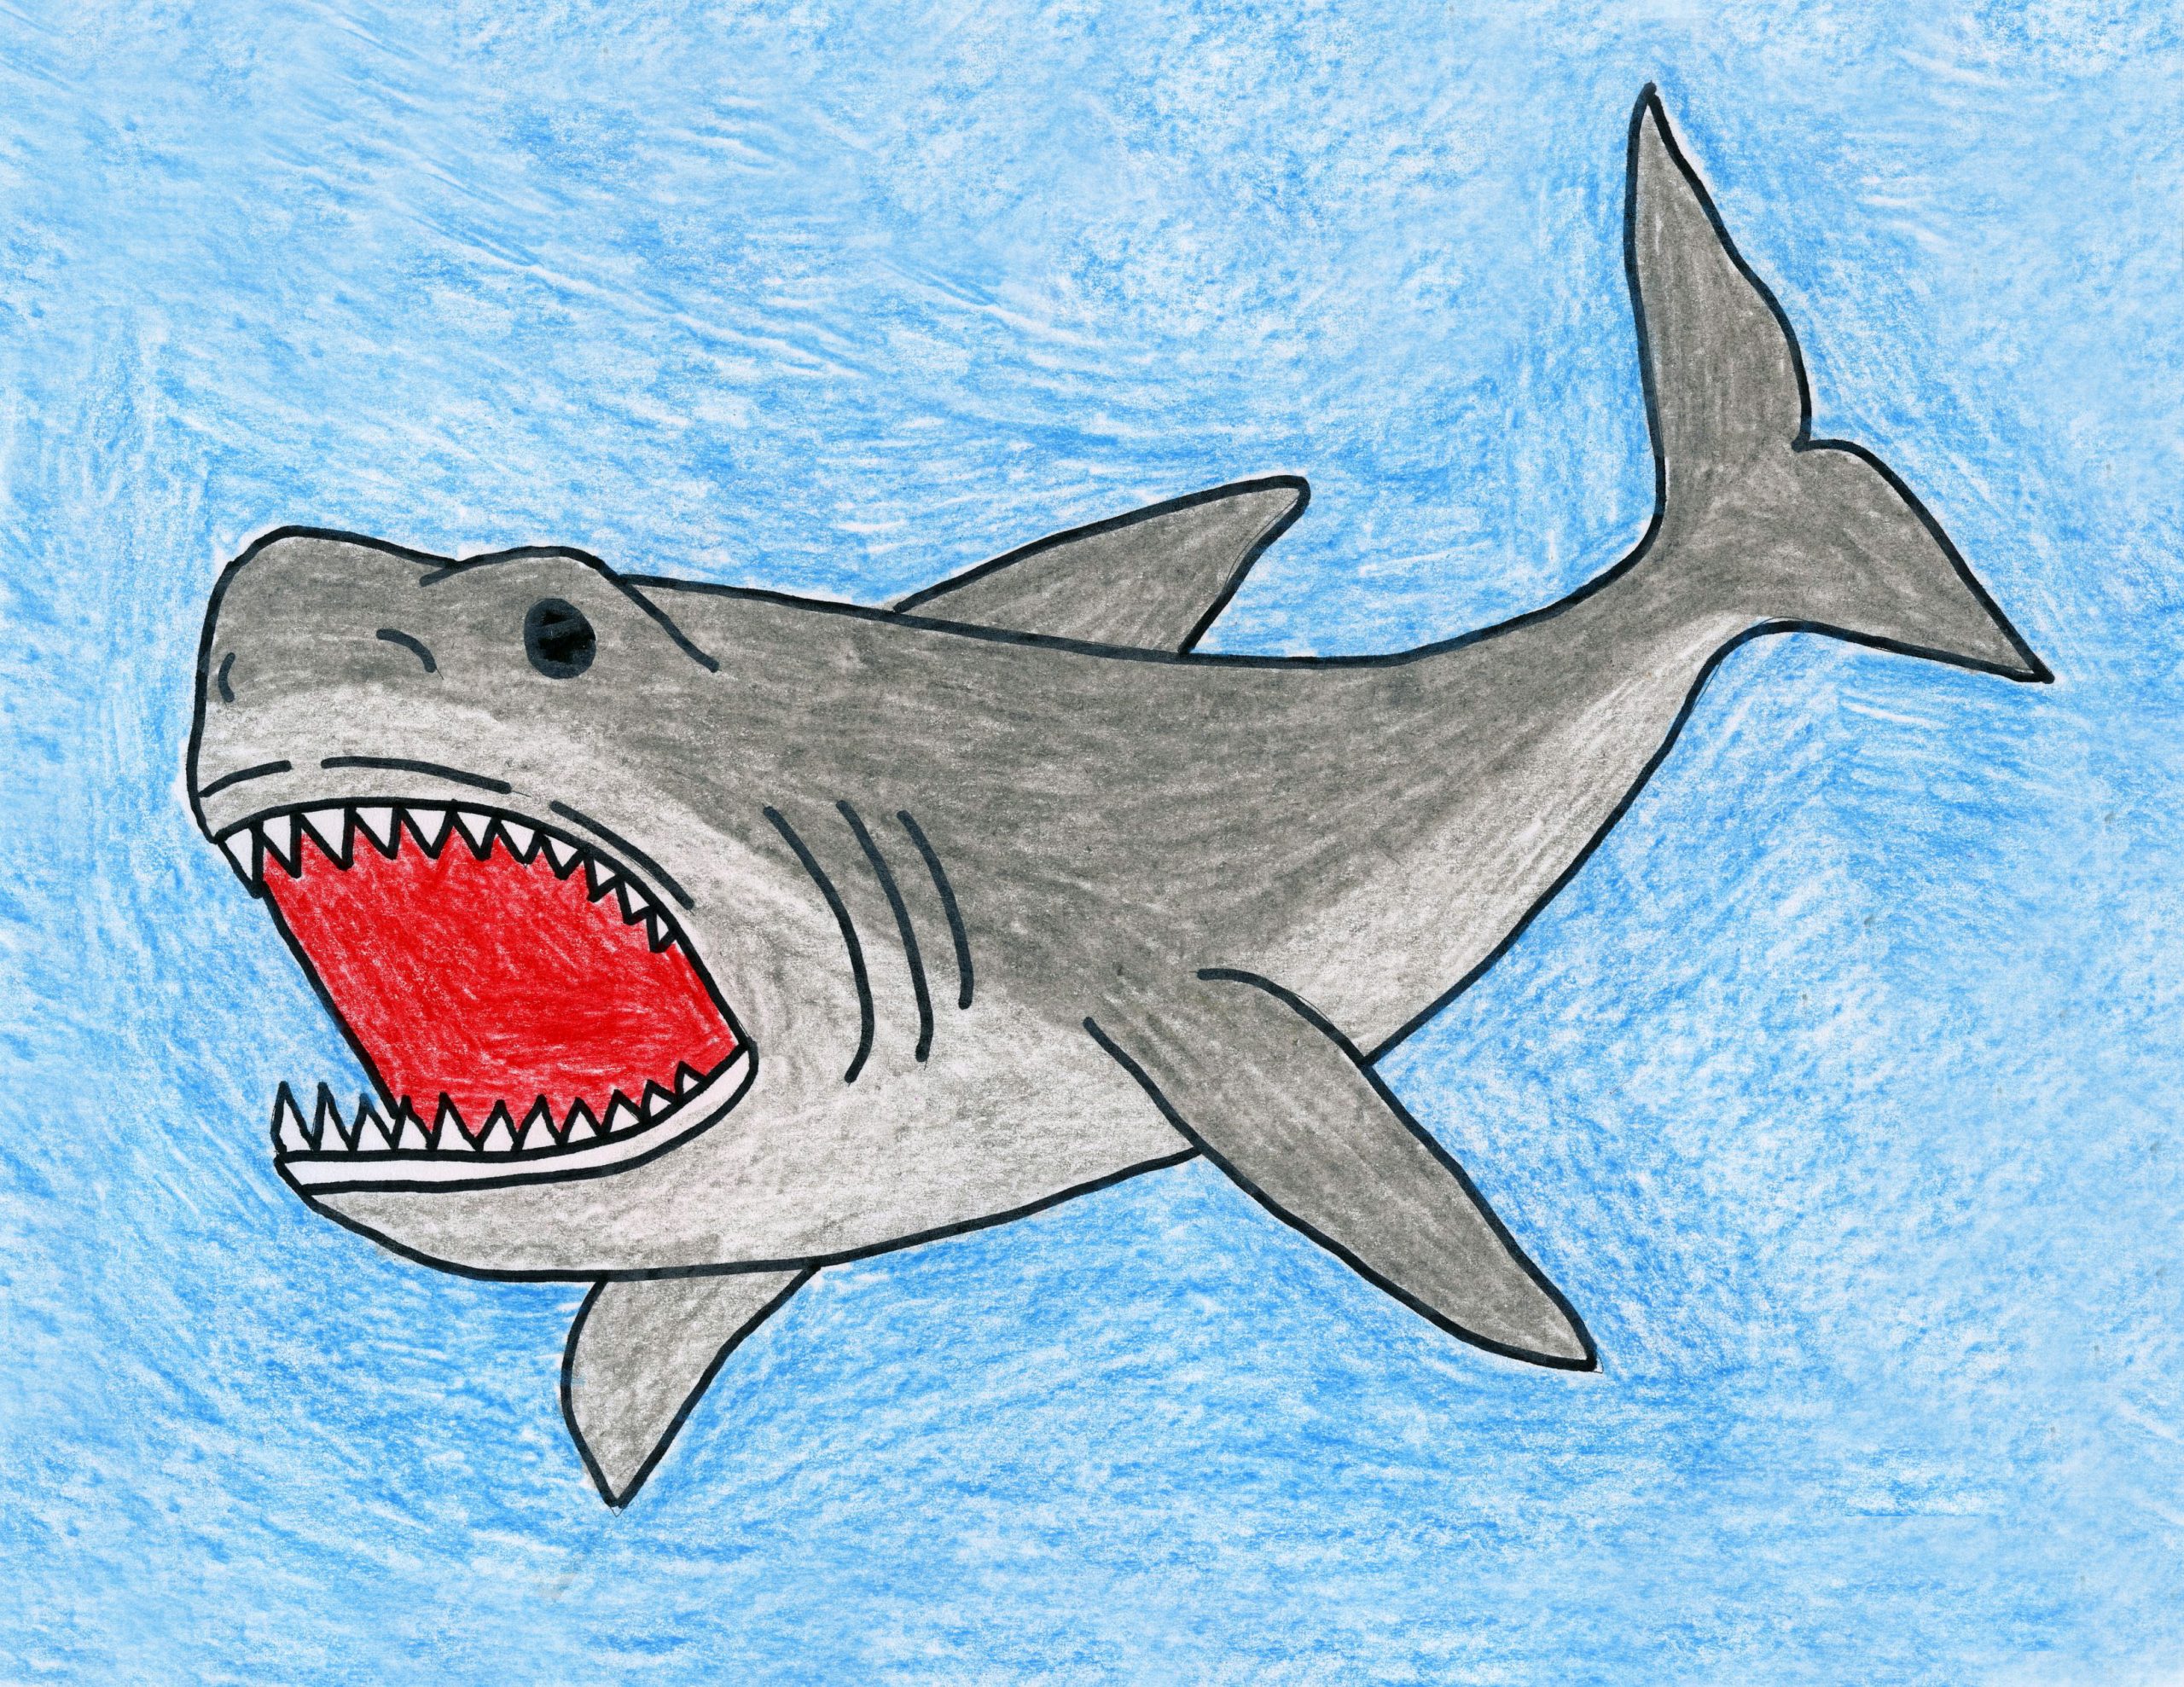 Draw a Shark - Art Projects for Kids